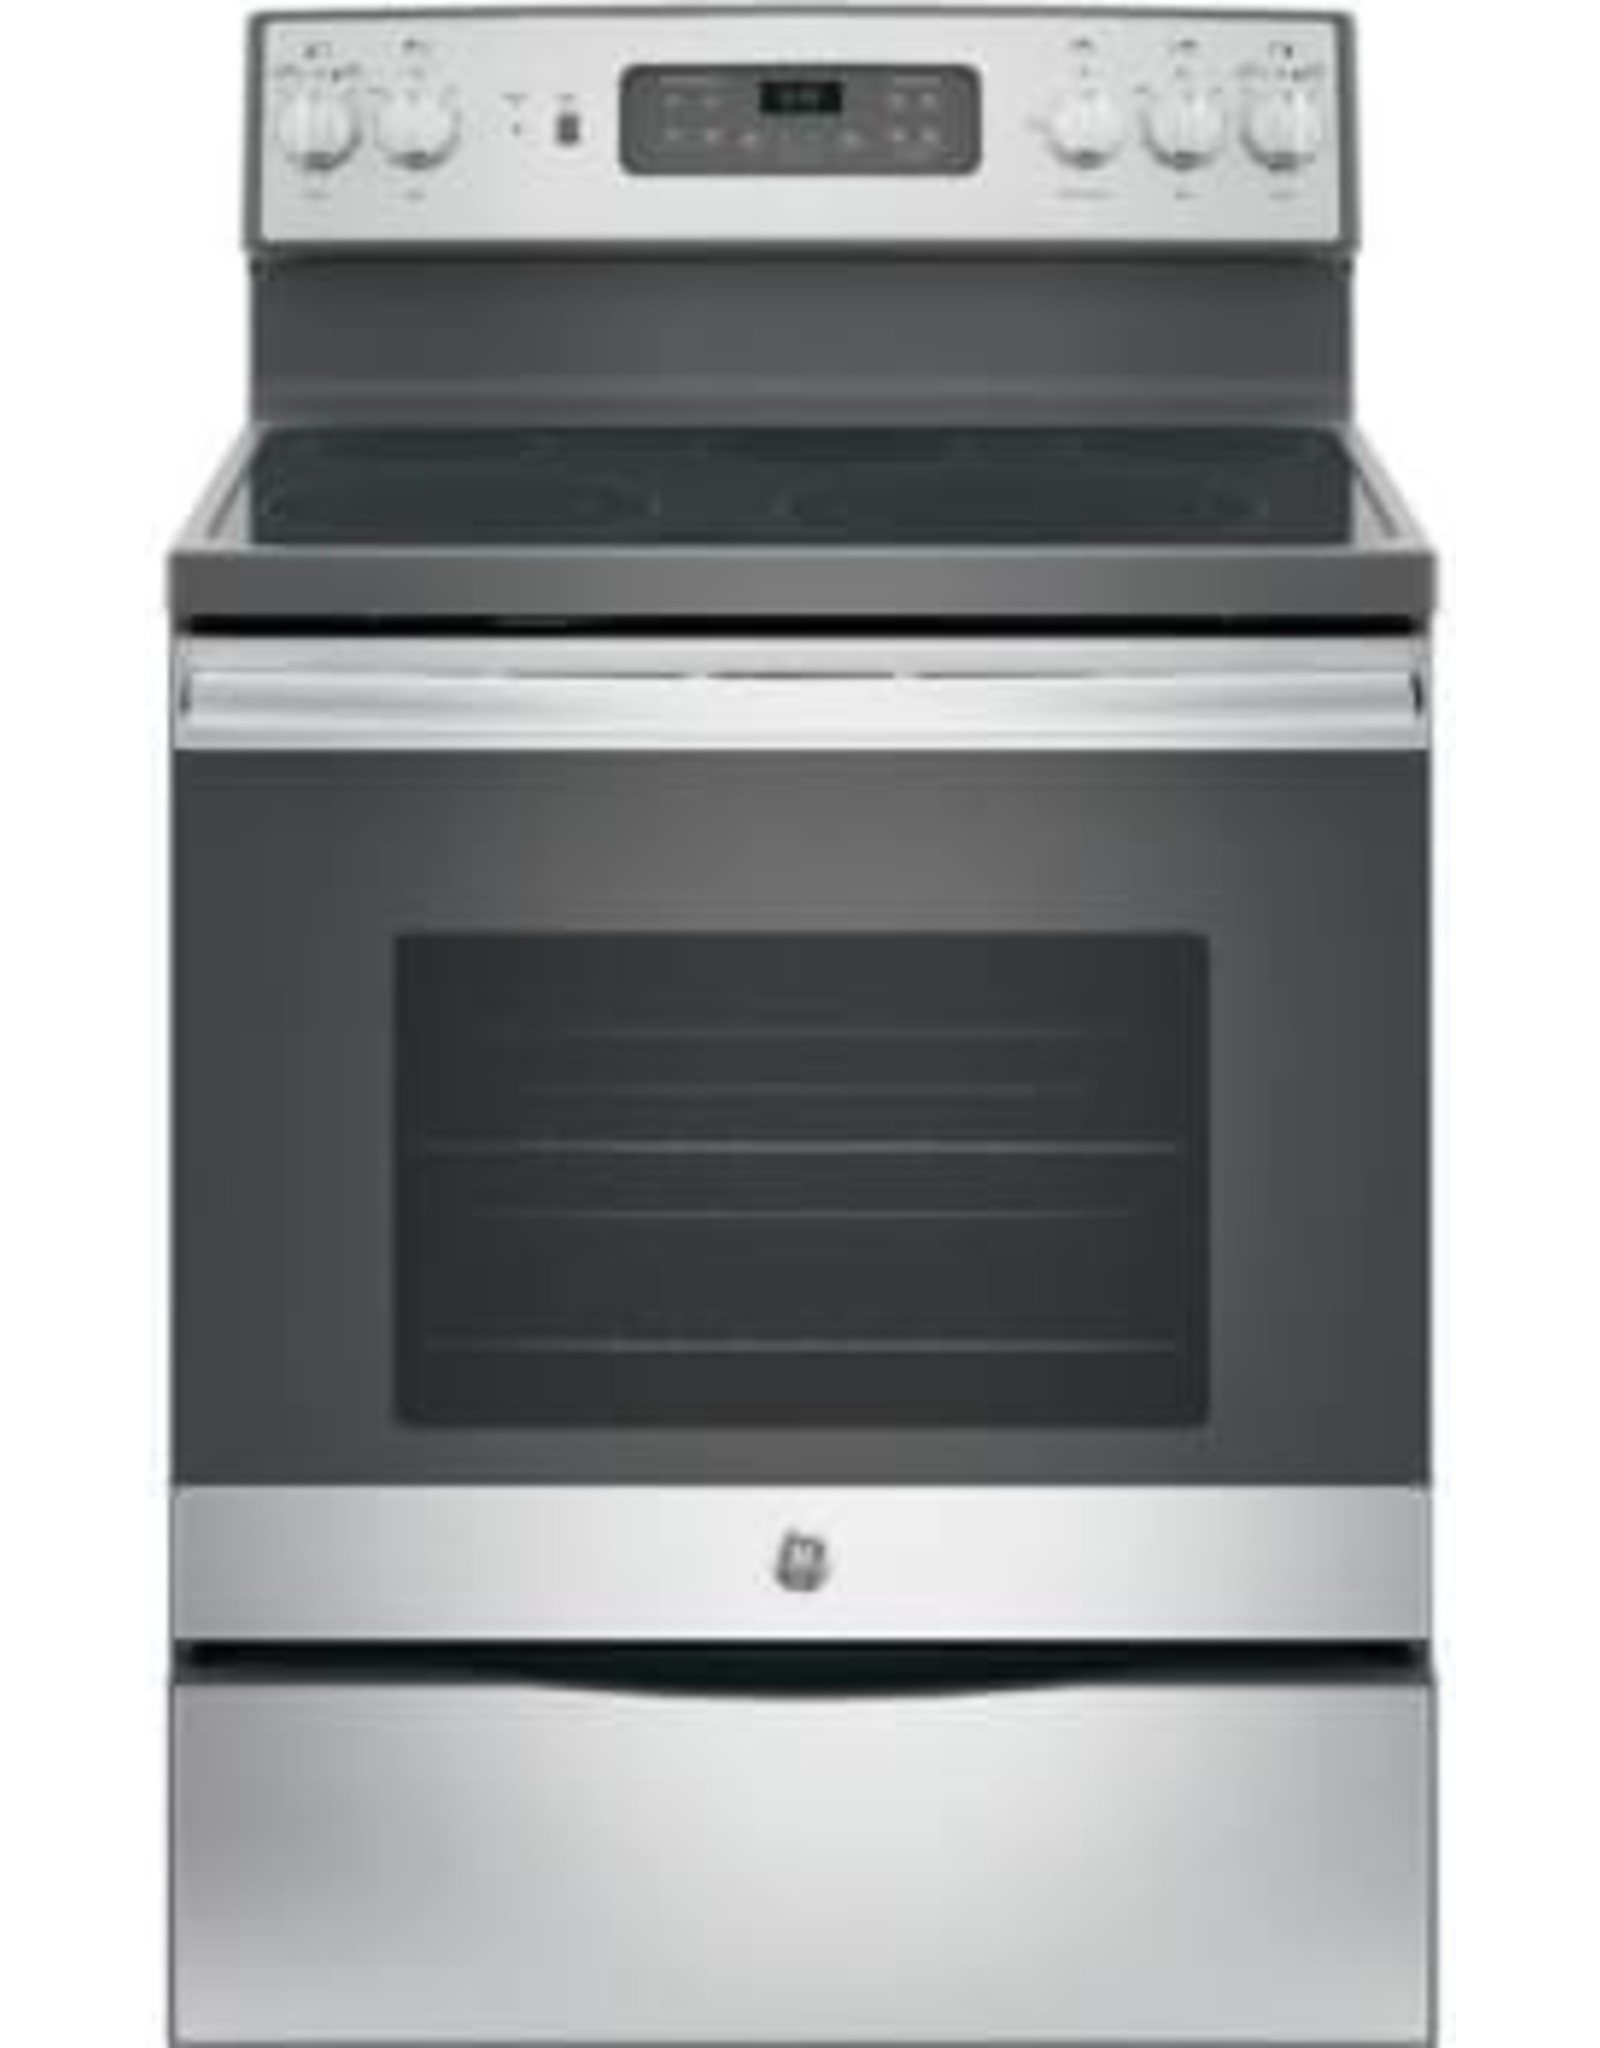 GE JB655YKFS GE 30 in. 5.3 cu. ft. Electric Range with Self-Cleaning Convection Oven in Fingerprint Resistant Stainless Steel